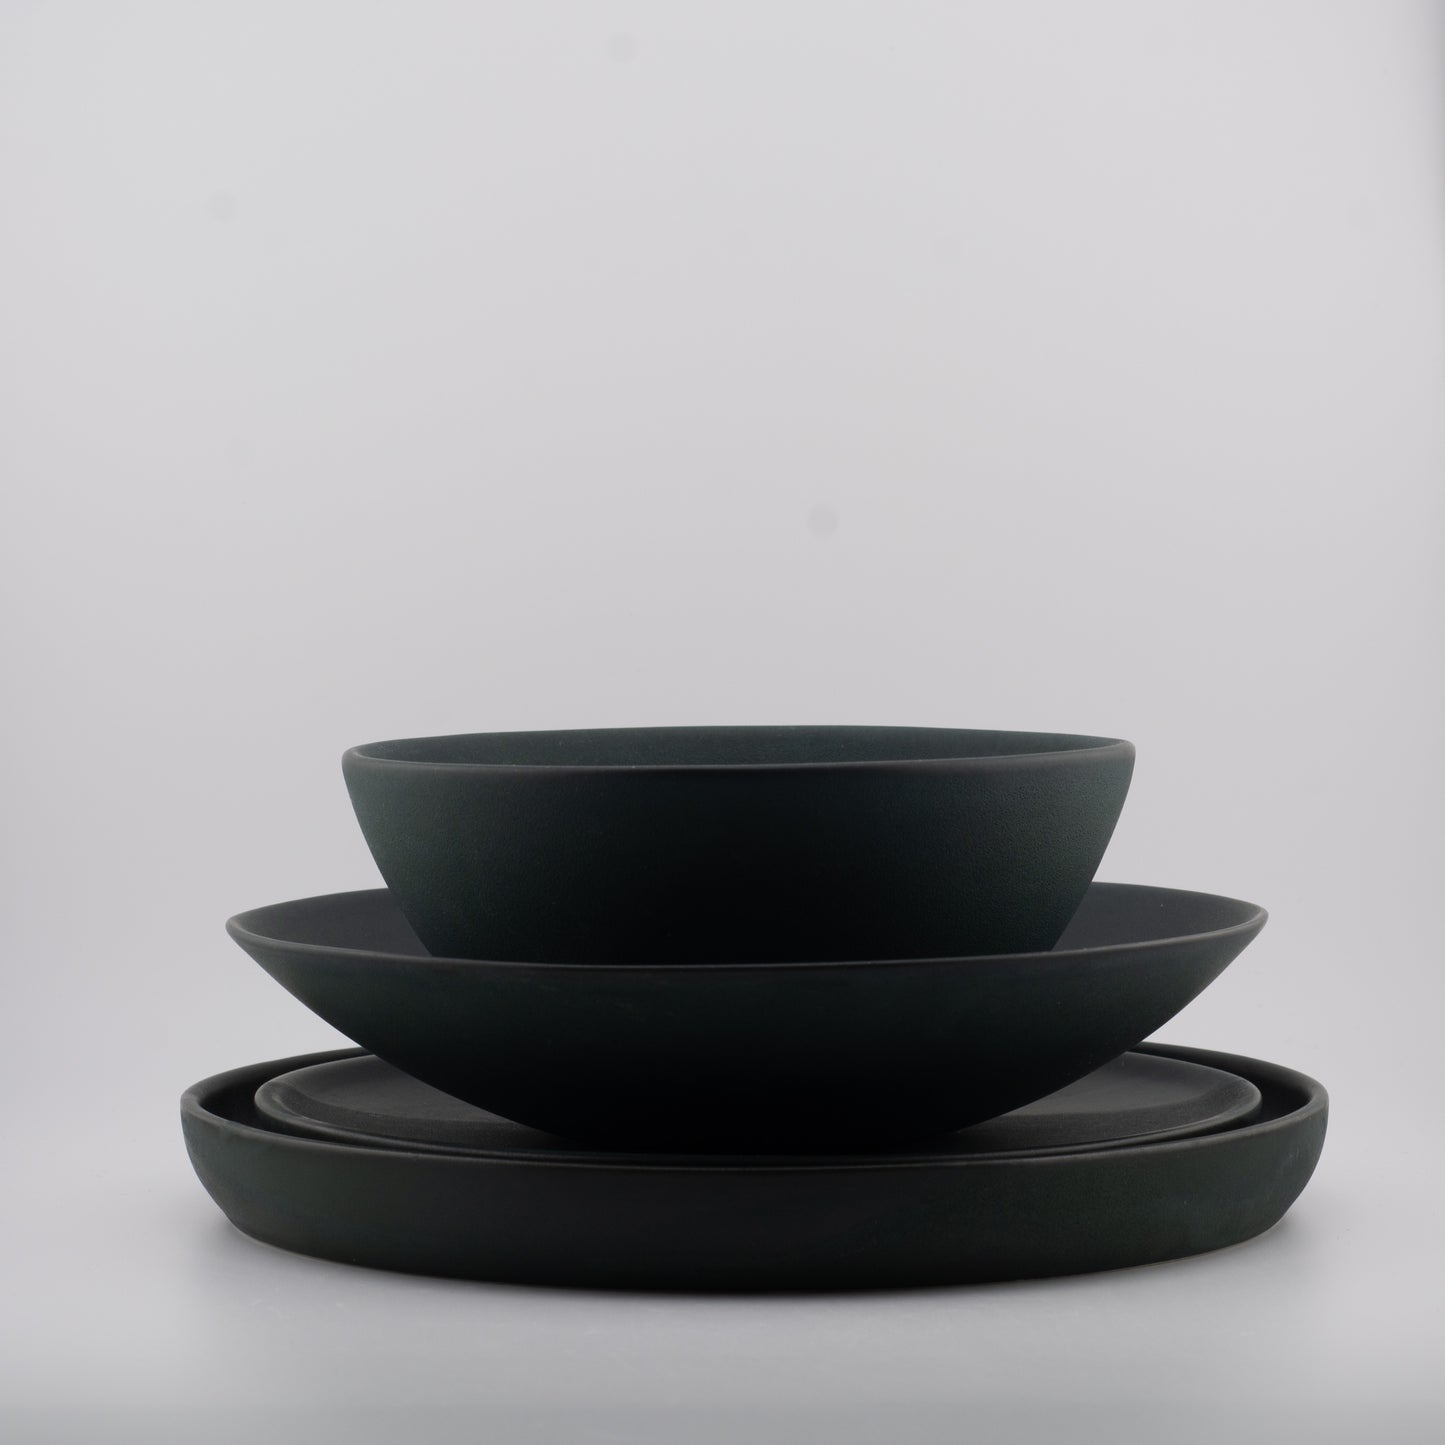 Midnight black plates and bowls